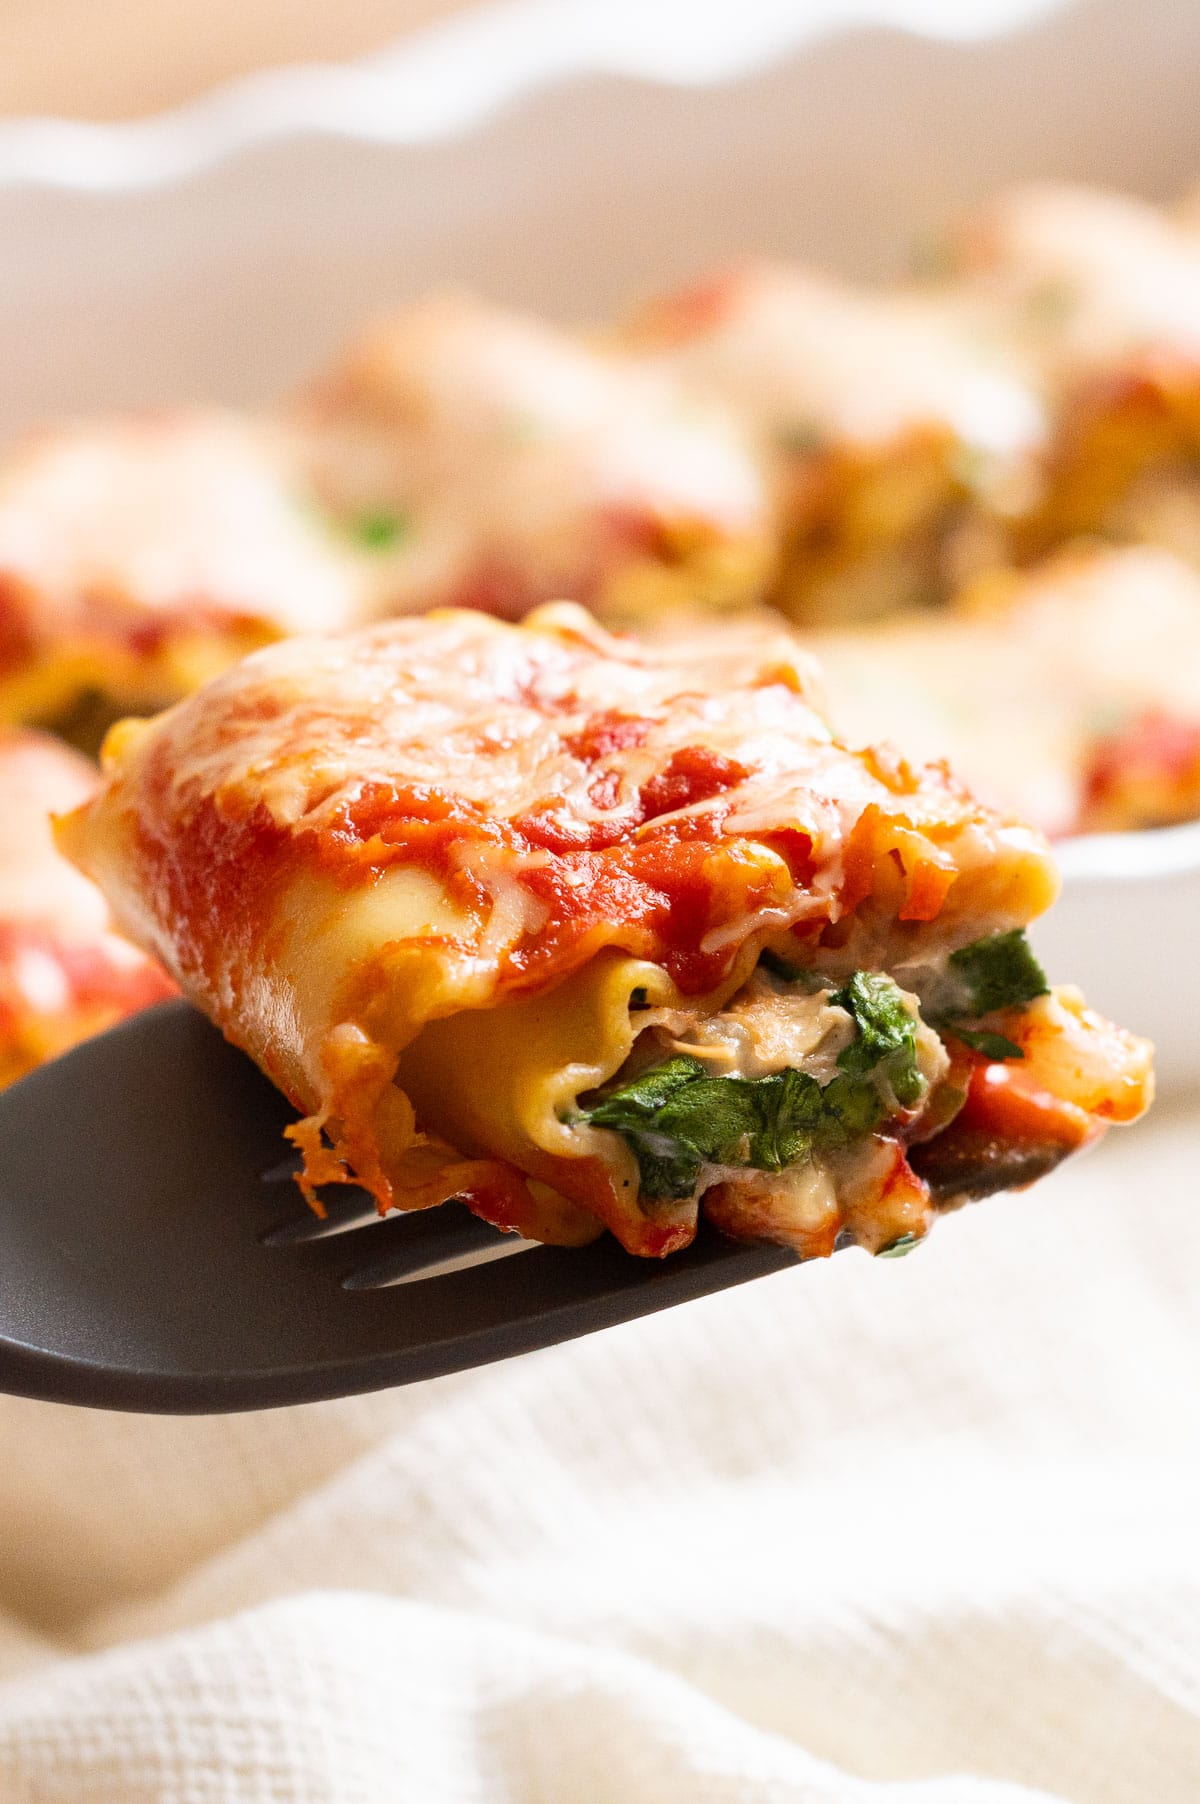 Chicken lasagna roll with artichokes and spinach on a spatula.